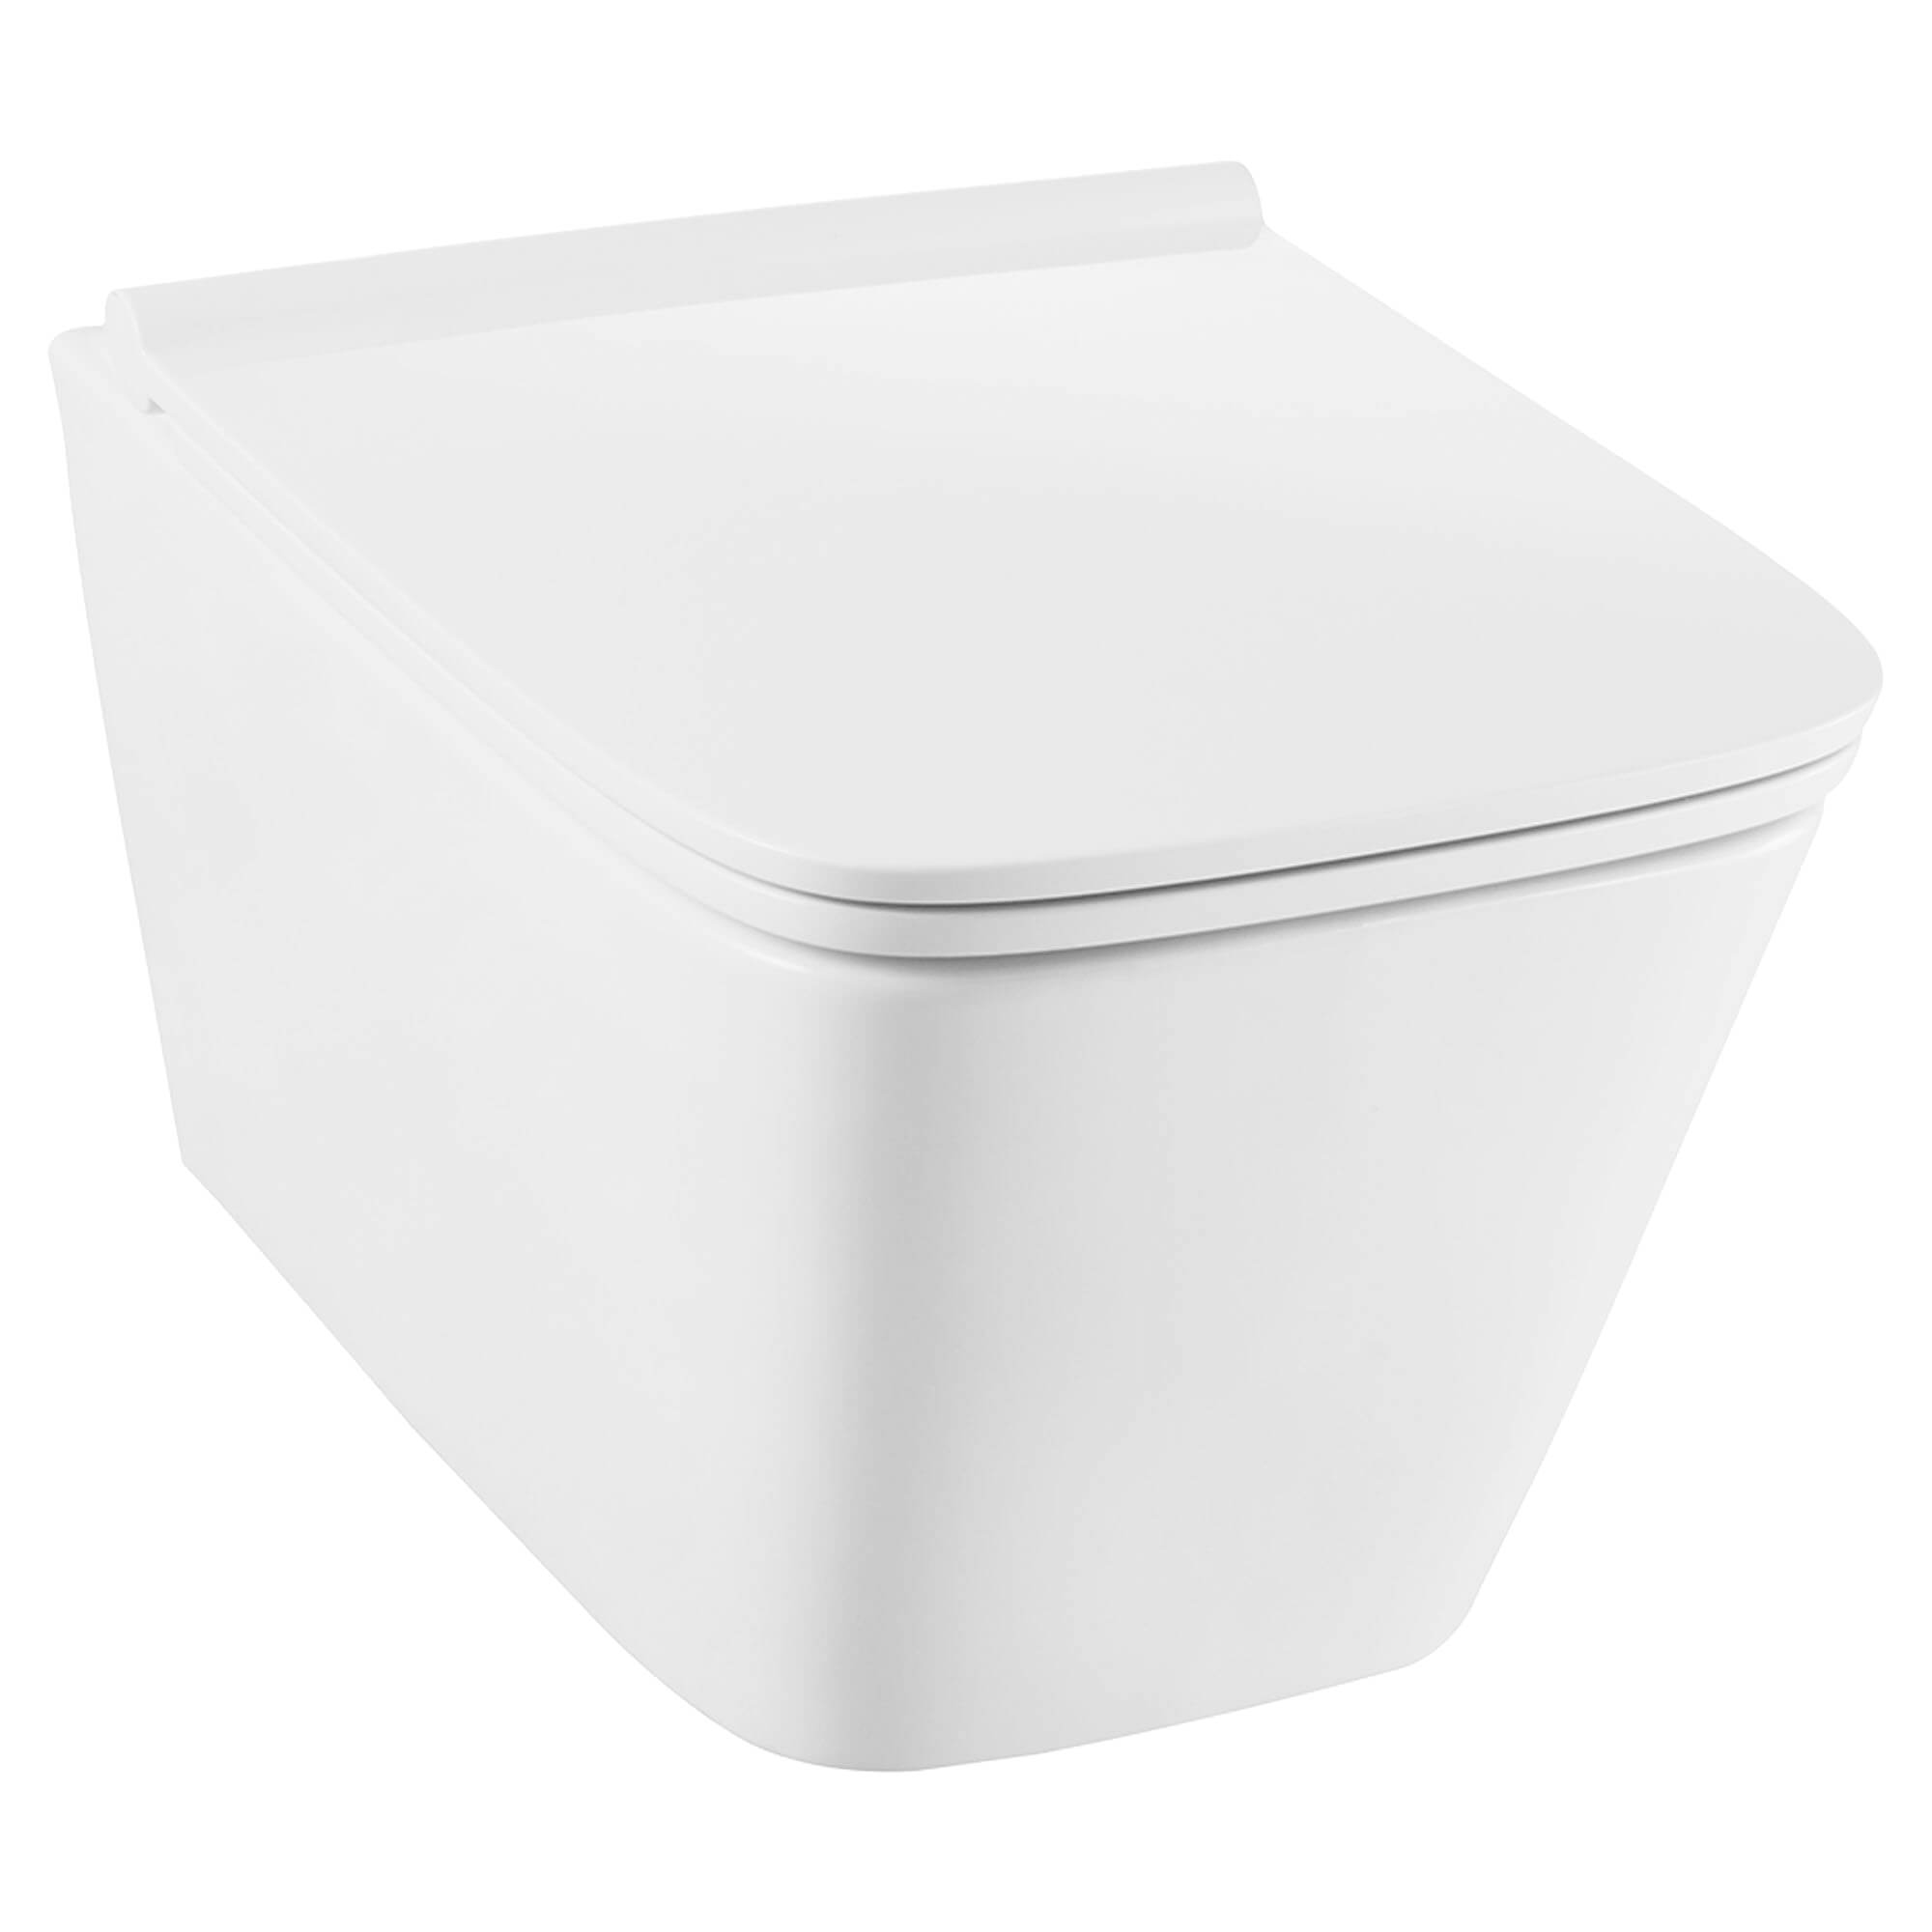 Modulus Wall Mounted Elongated Toilet in Canvas White